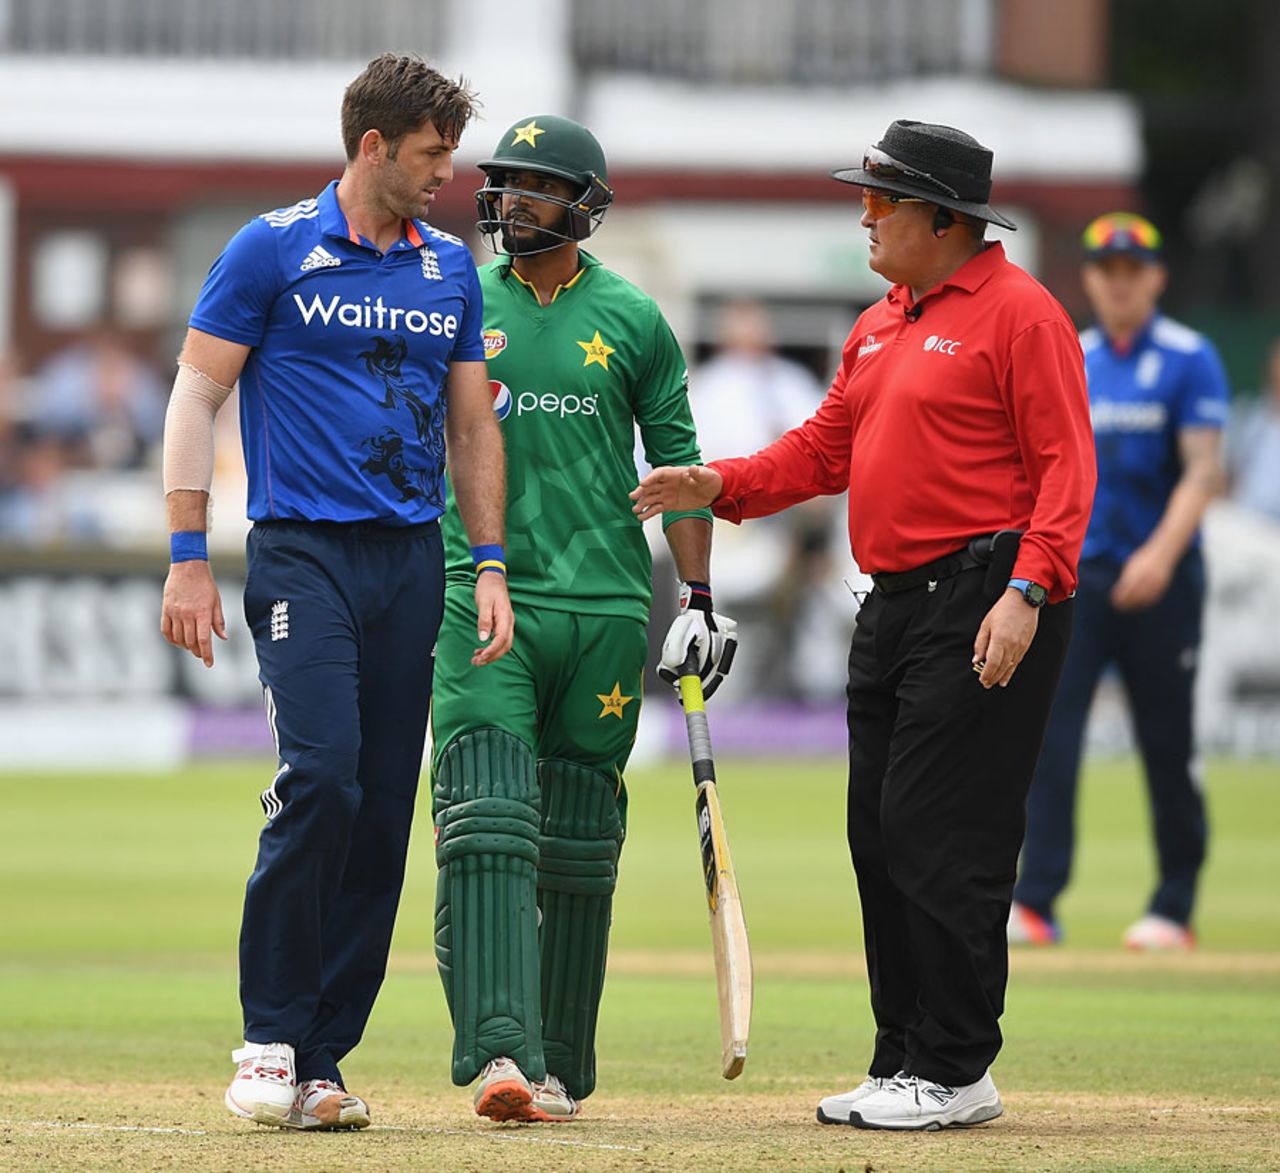 The umpire stepped in when Liam Plunkett and Imad Wasim shared a few words, England v Pakistan, 2nd ODI, Lord's, August 27, 2016